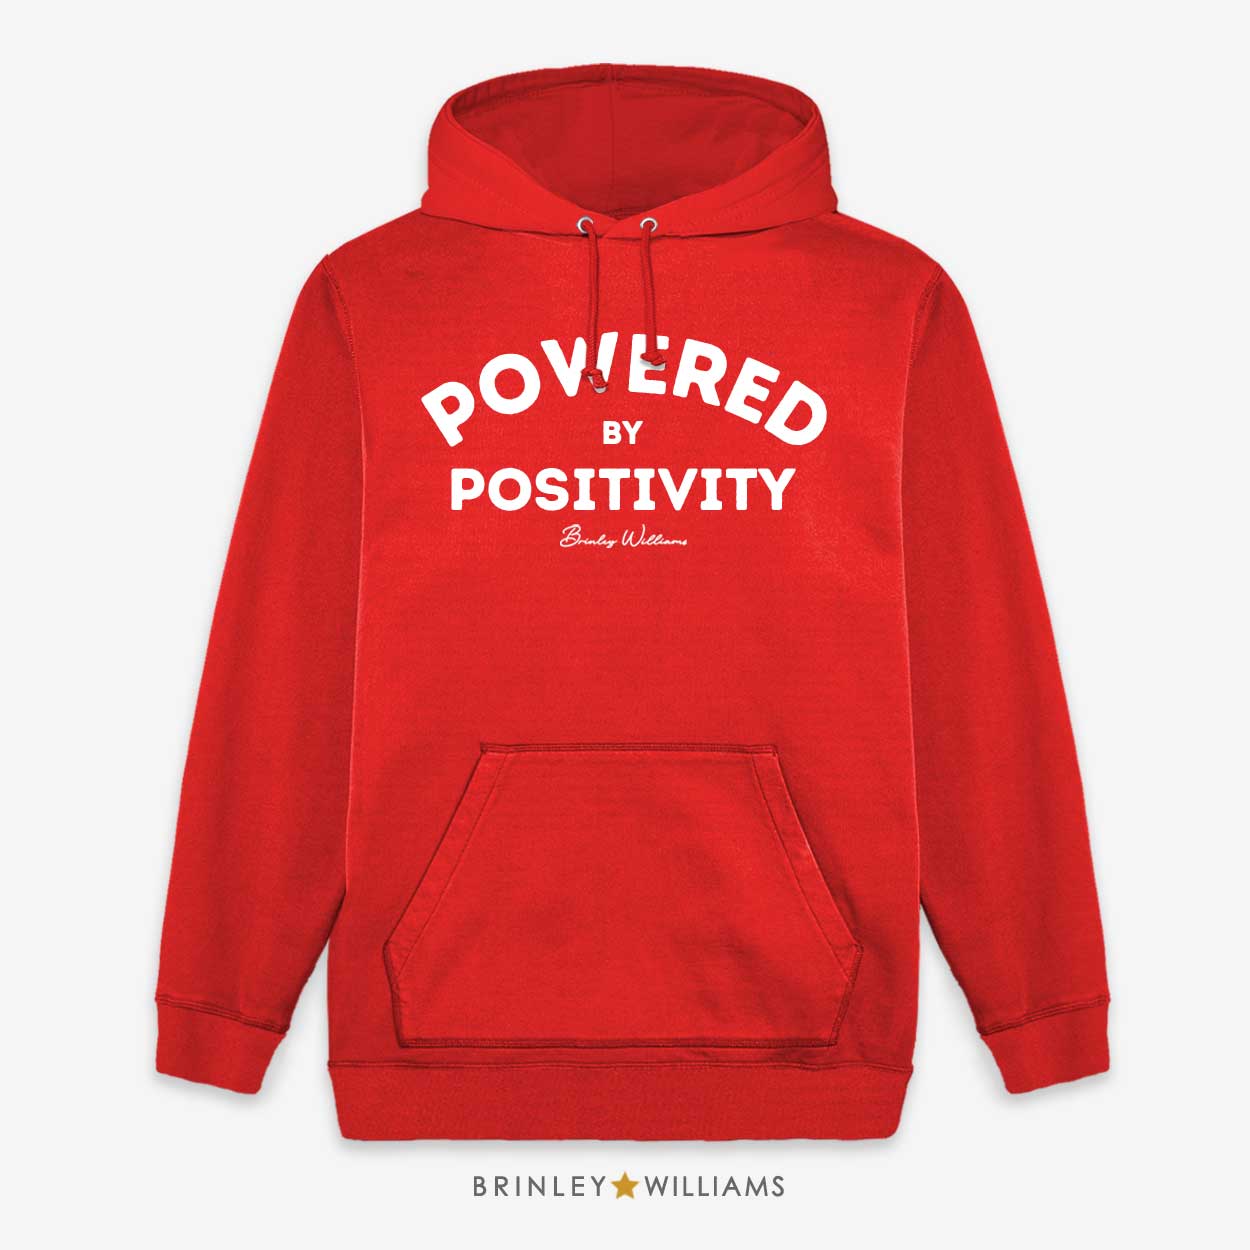 Powered by Positivity Unisex Hoodie - Fire Red